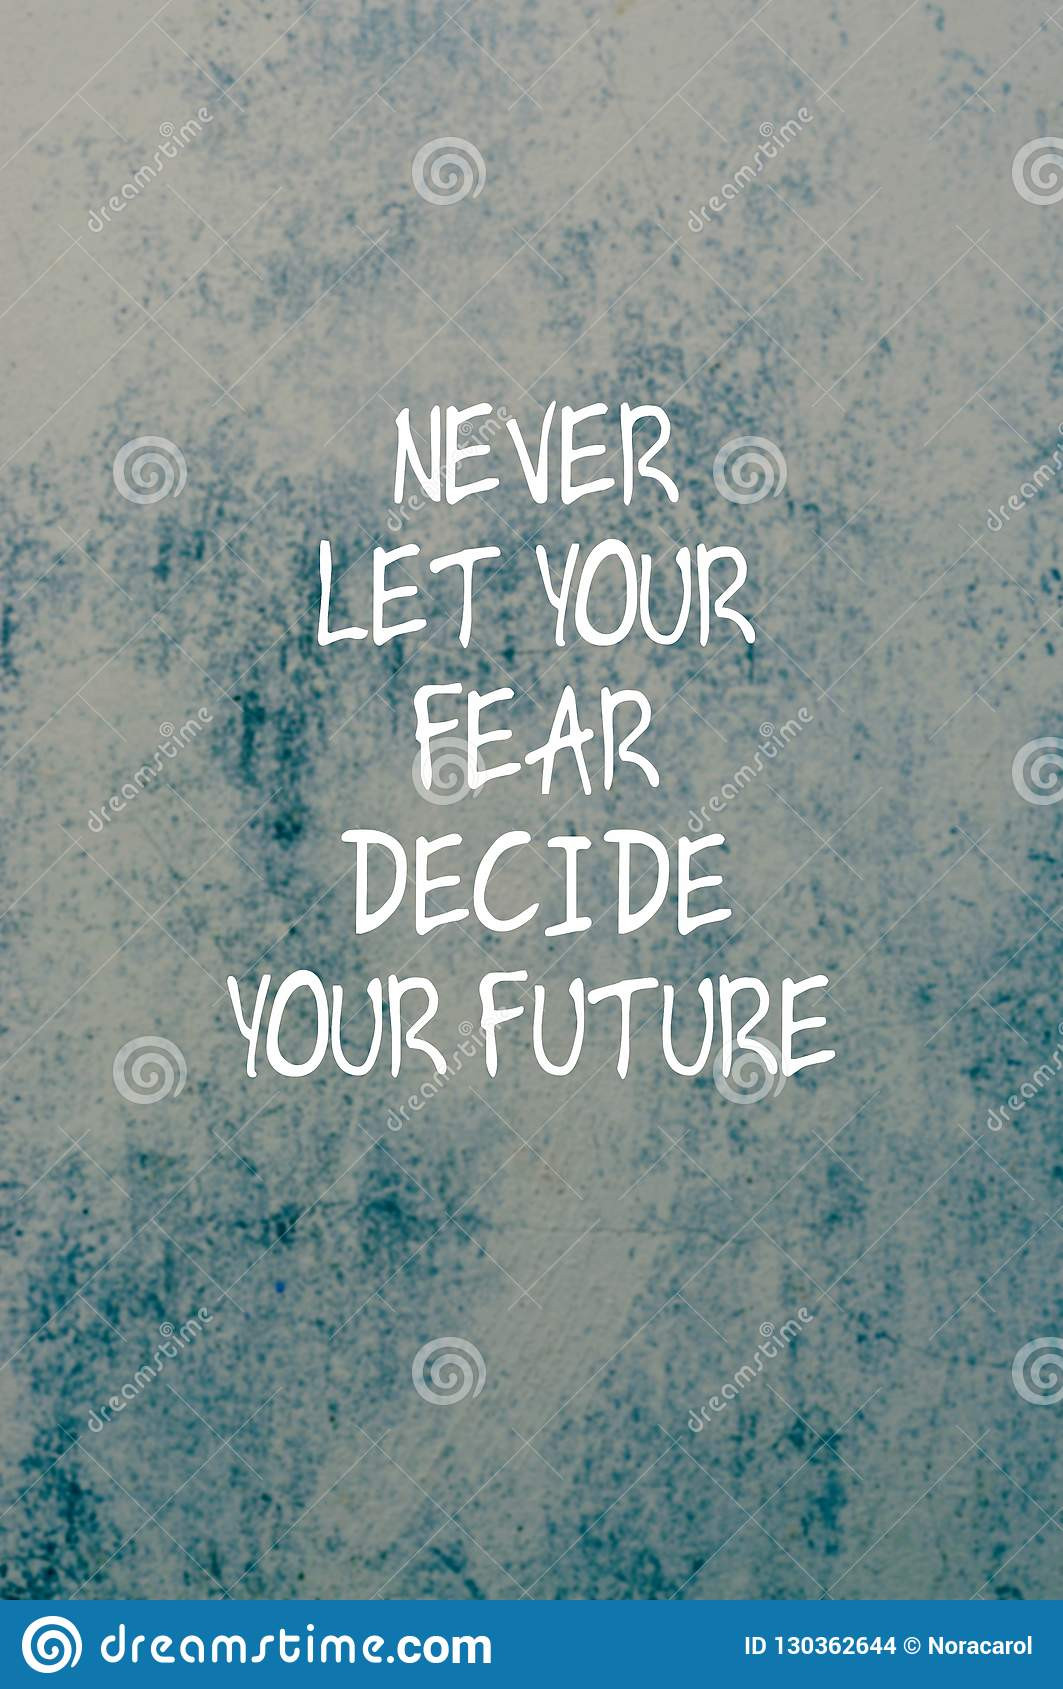 Positive Future Quotes
 Inspirational Quotes Never Let Your Fear Decide Your